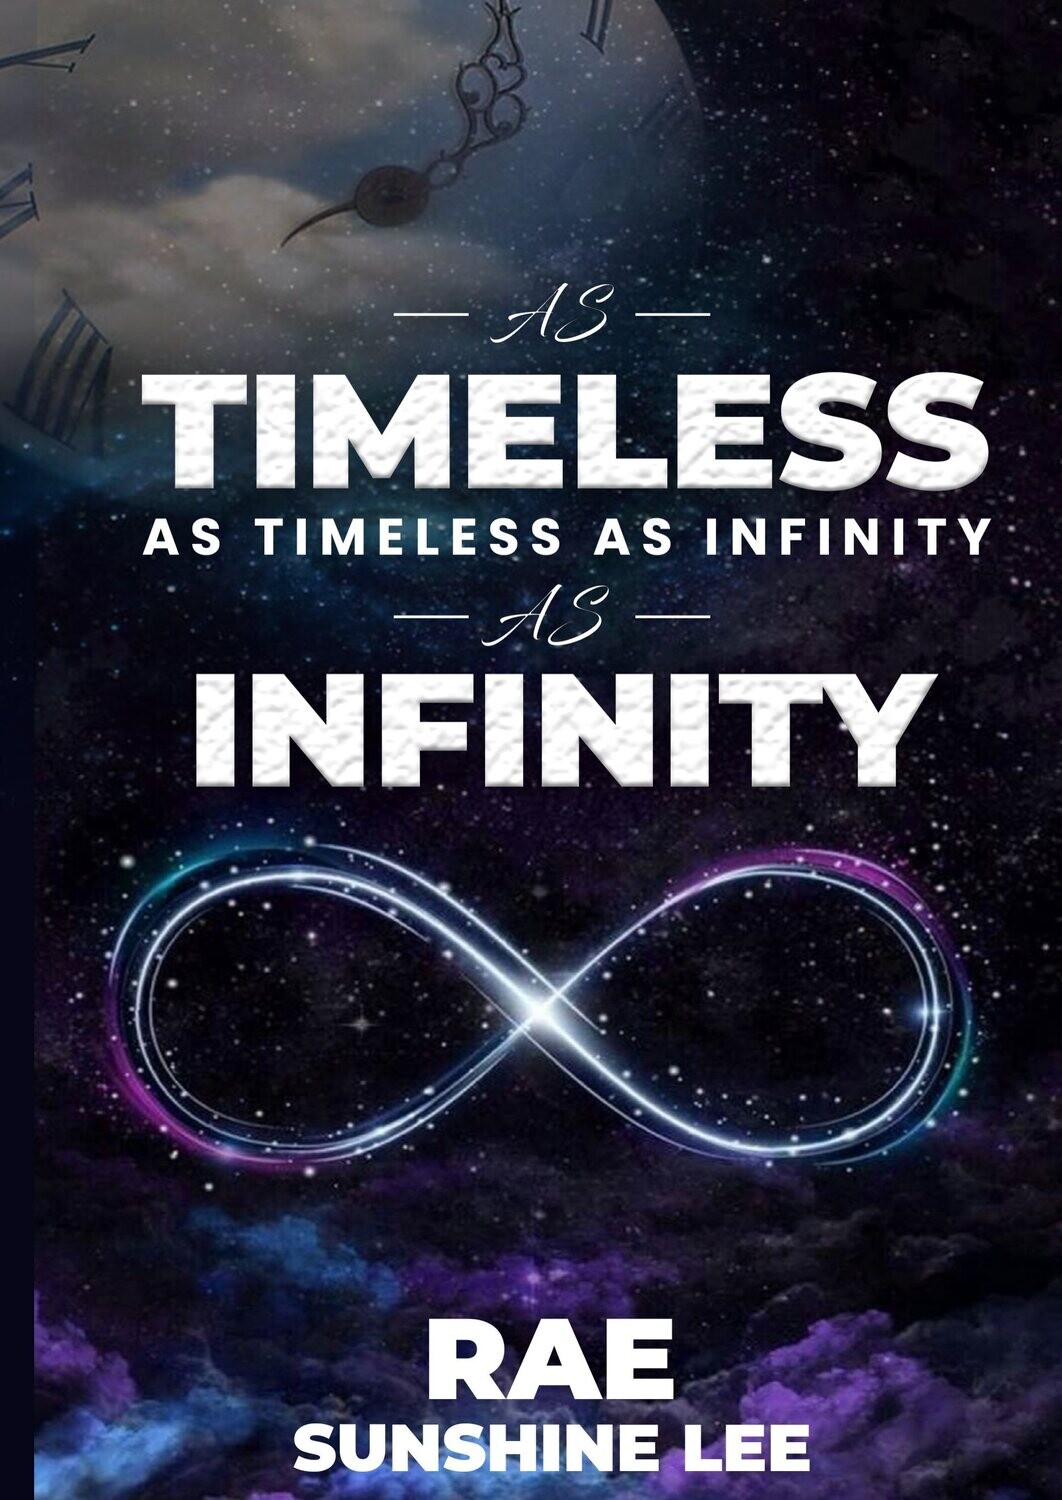 Timeless Infinity by Rae Sunshine Lee